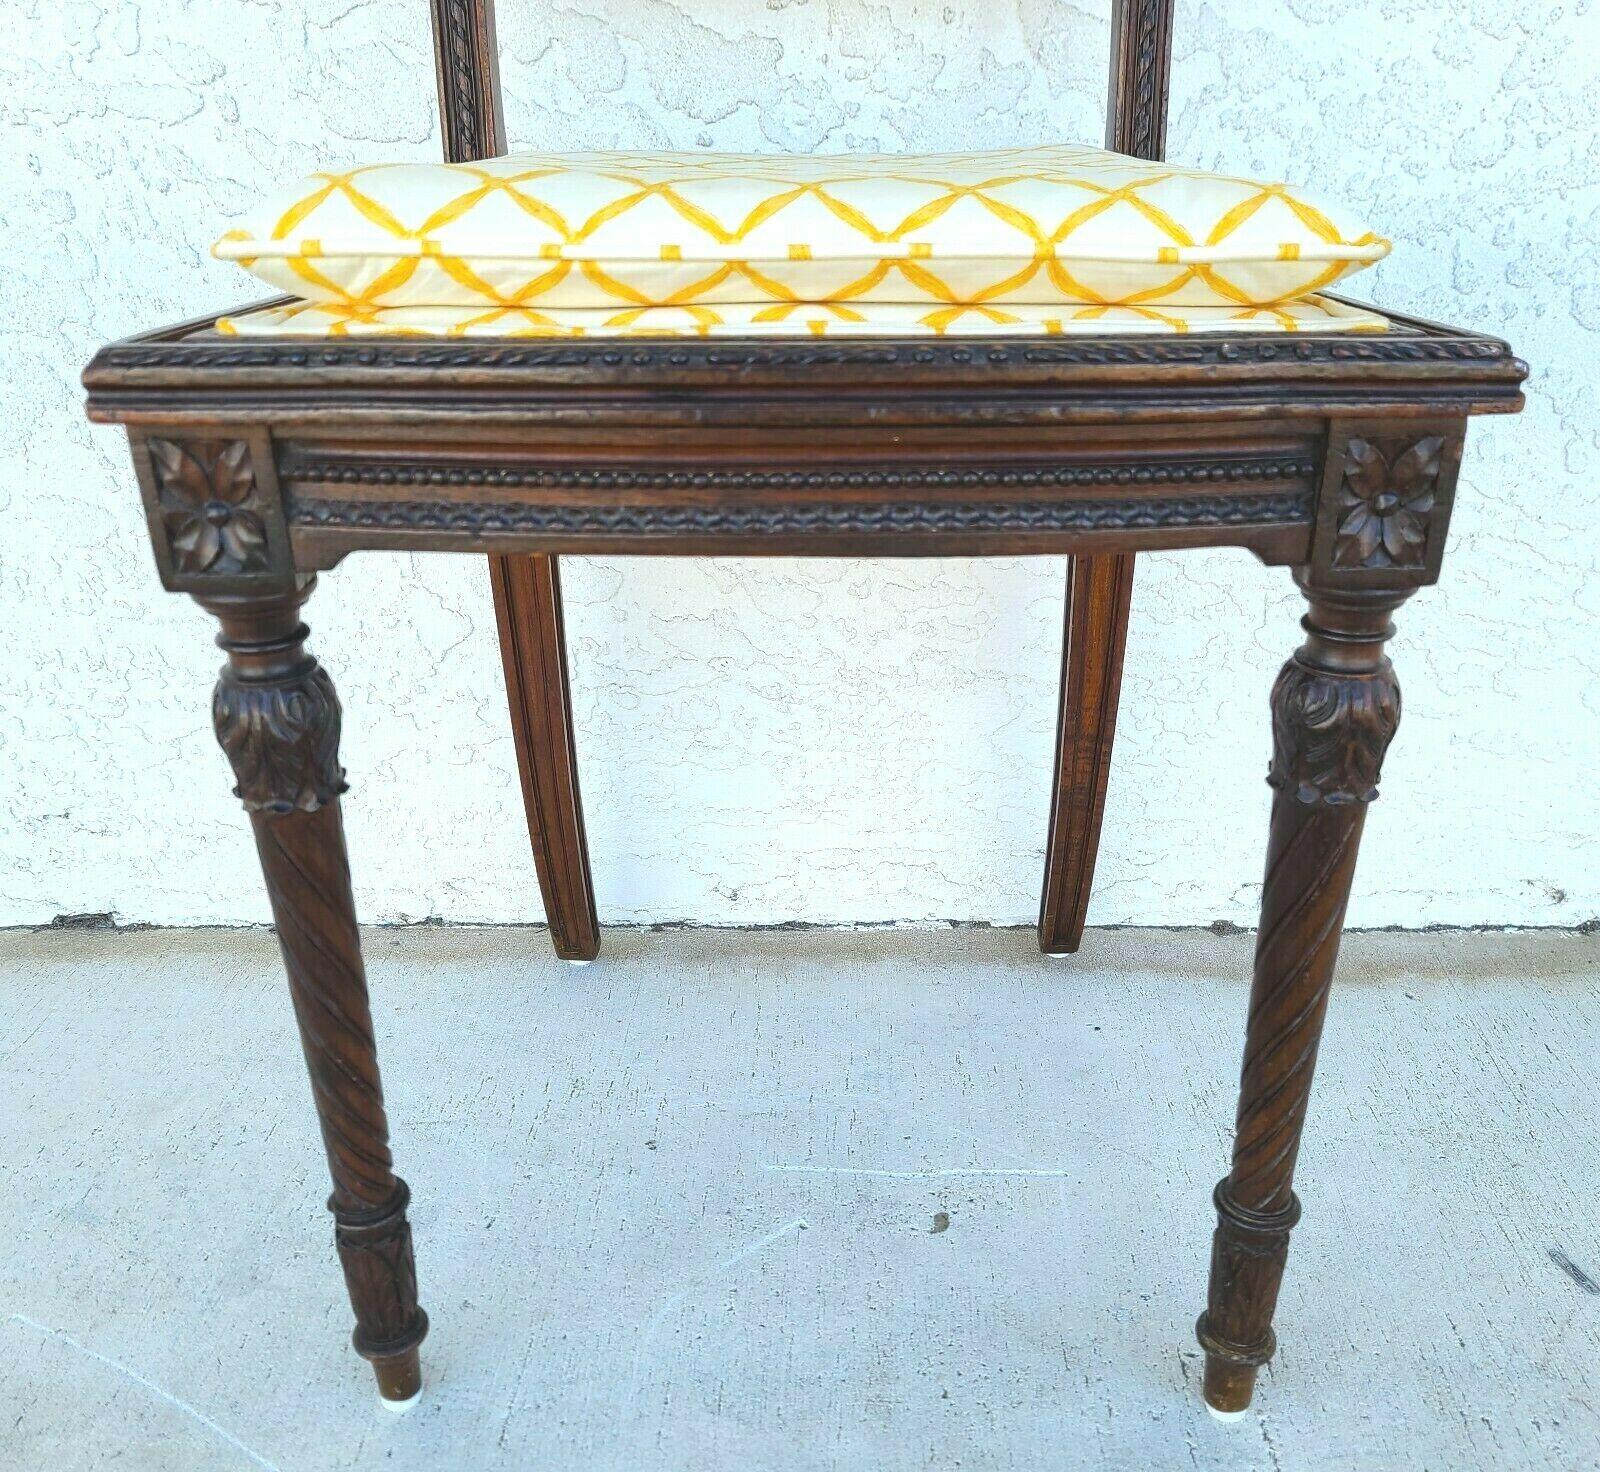 Offering One Of Our Recent Palm Beach Estate Fine Furniture Acquisitions Of An 
Antique French Cane walnut accent desk vanity chair

Approximate Measurements in Inches
37